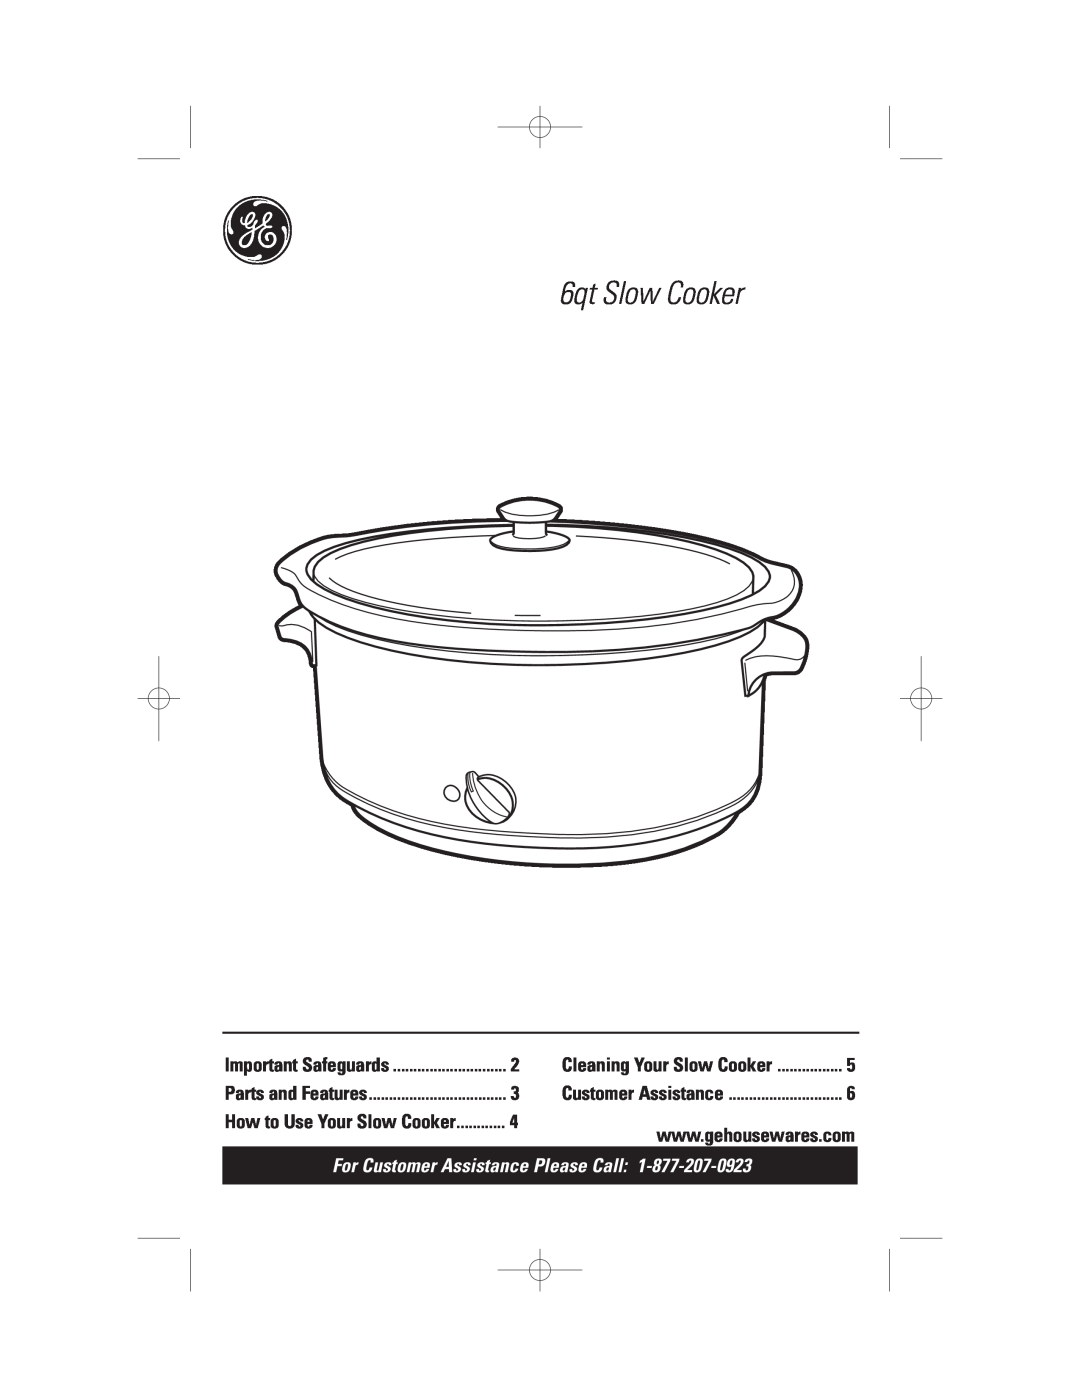 GE 169016 manual 6qt Slow Cooker, For Customer Assistance Please Call 